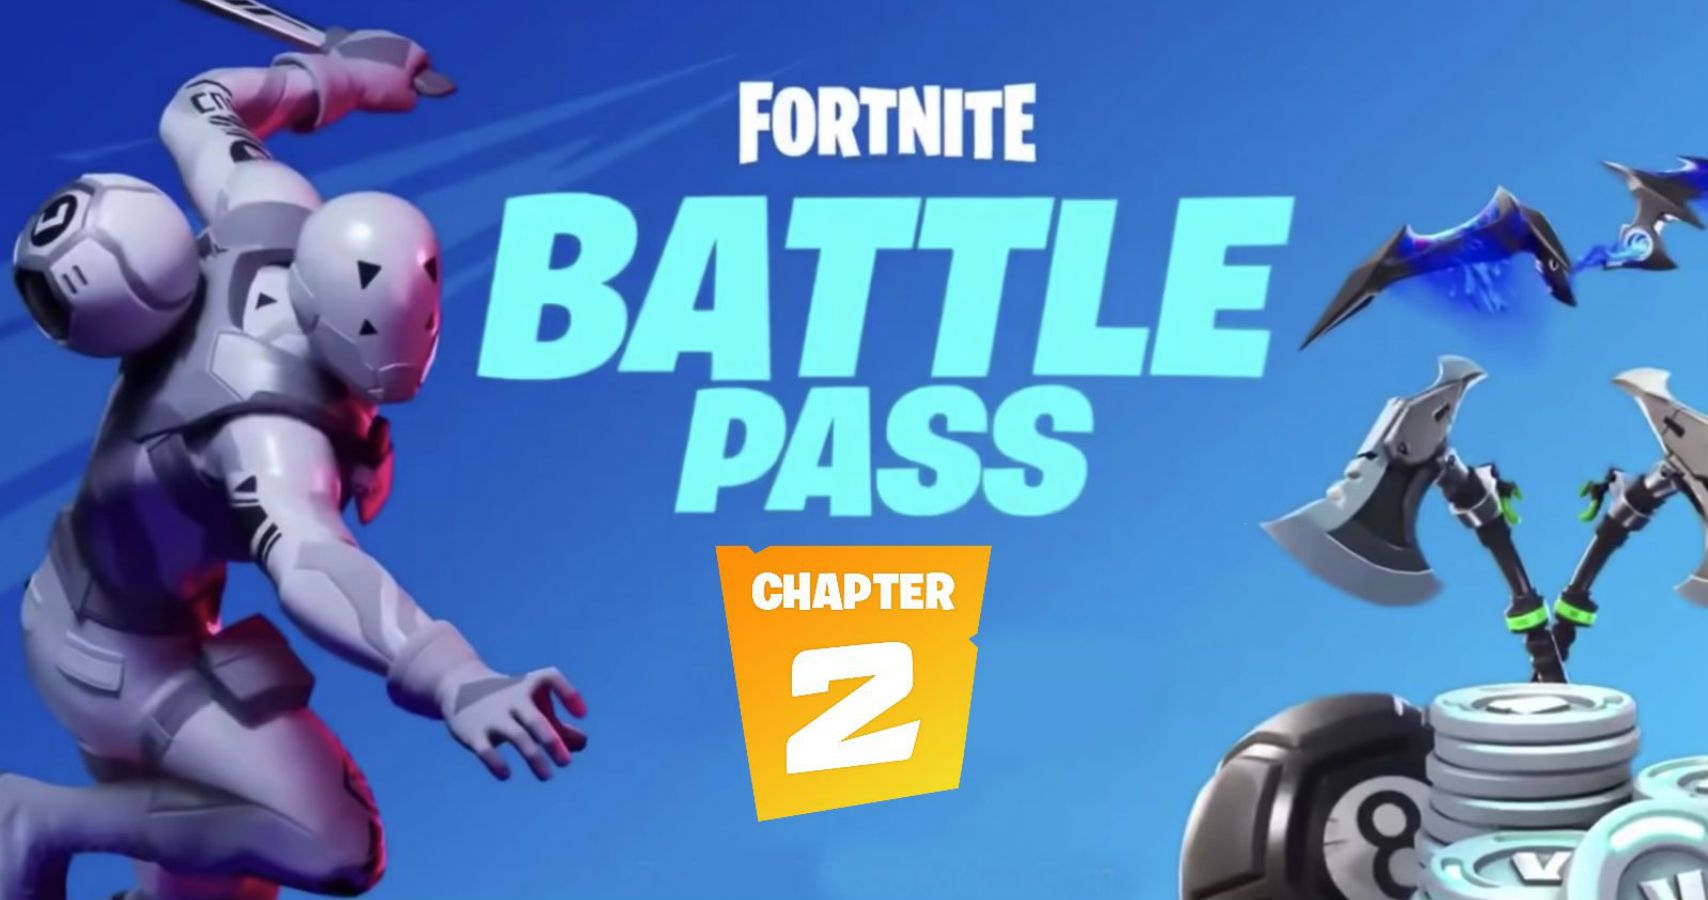 Epic Fixed Fortnite’s Battle Pass Issue… At Least For Now